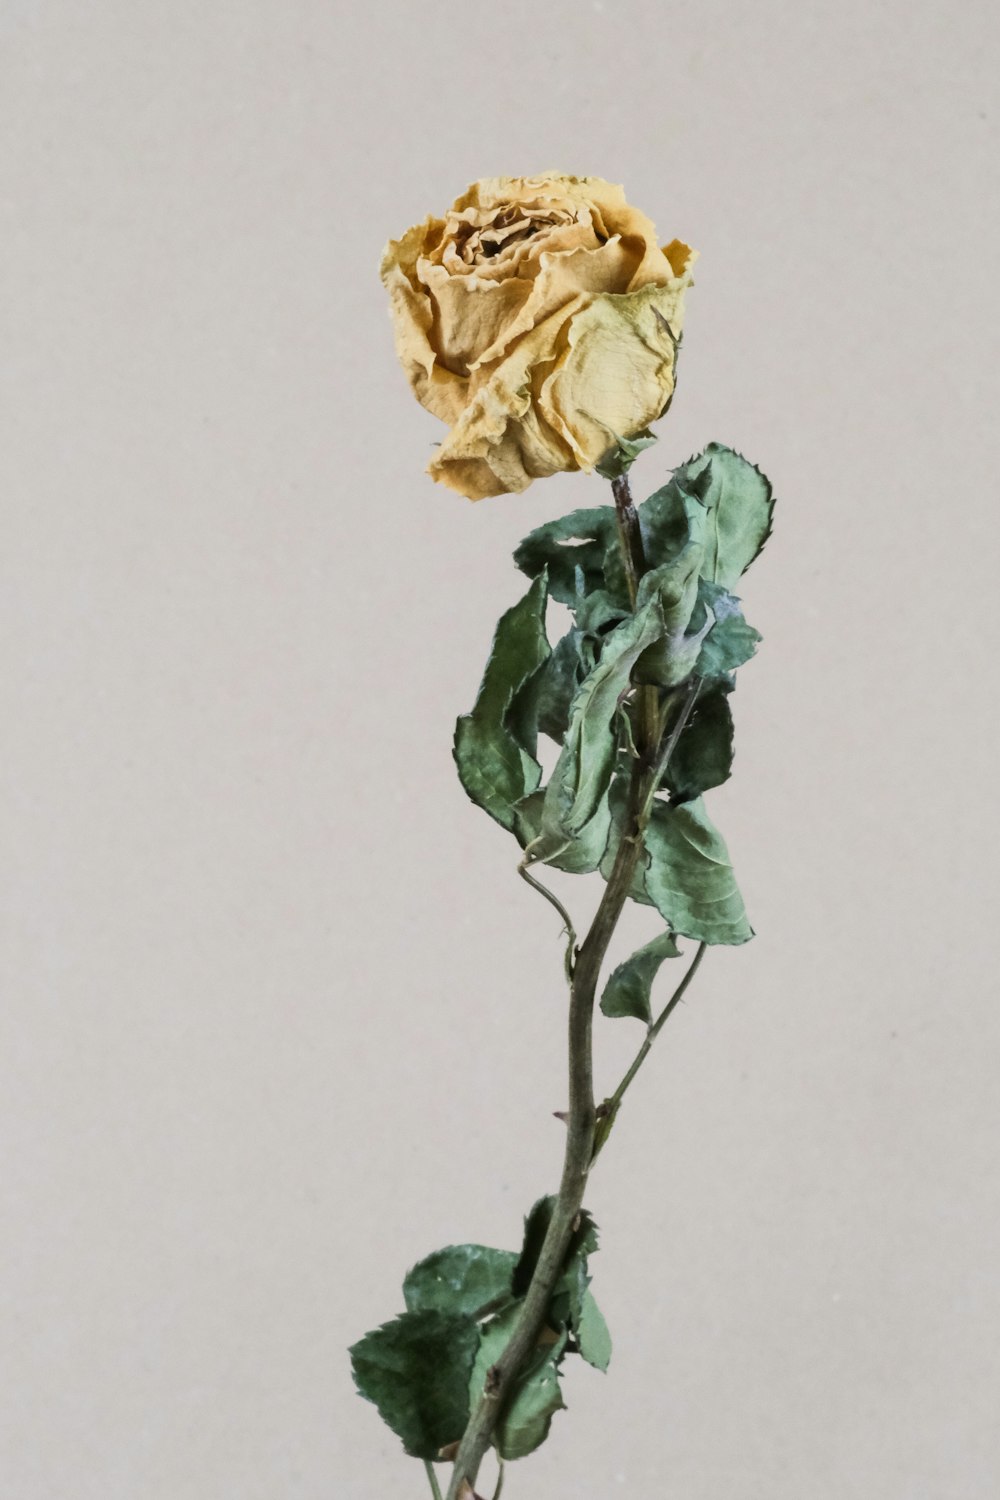 yellow rose in white background